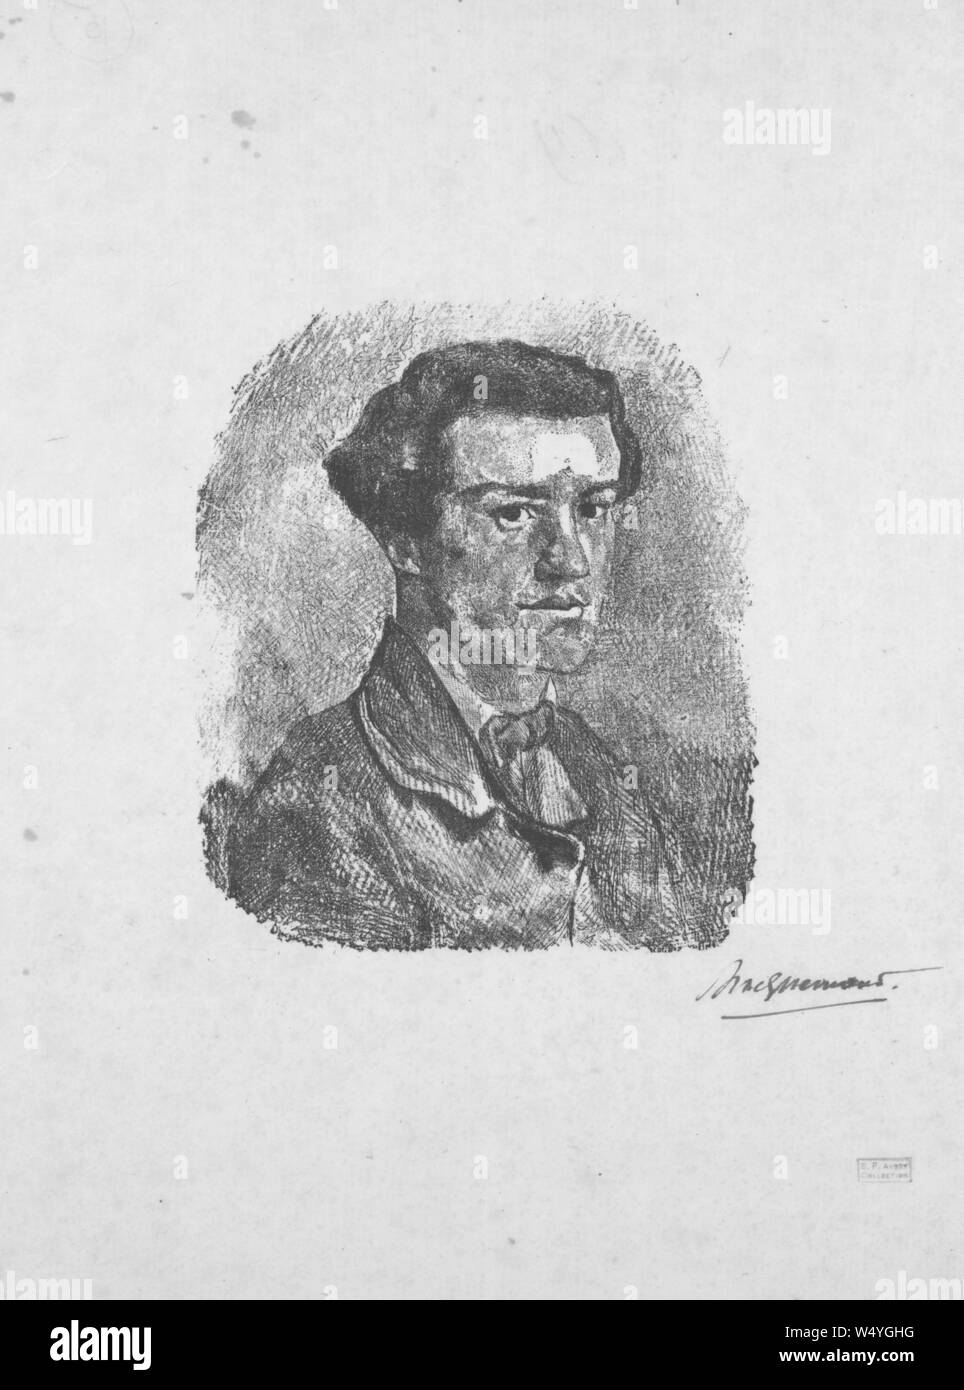 Engraved portrait of a young man, Samuel Putnam Avery collection, illustrated by Felix Henri Bracquemond, 1852. () Stock Photo